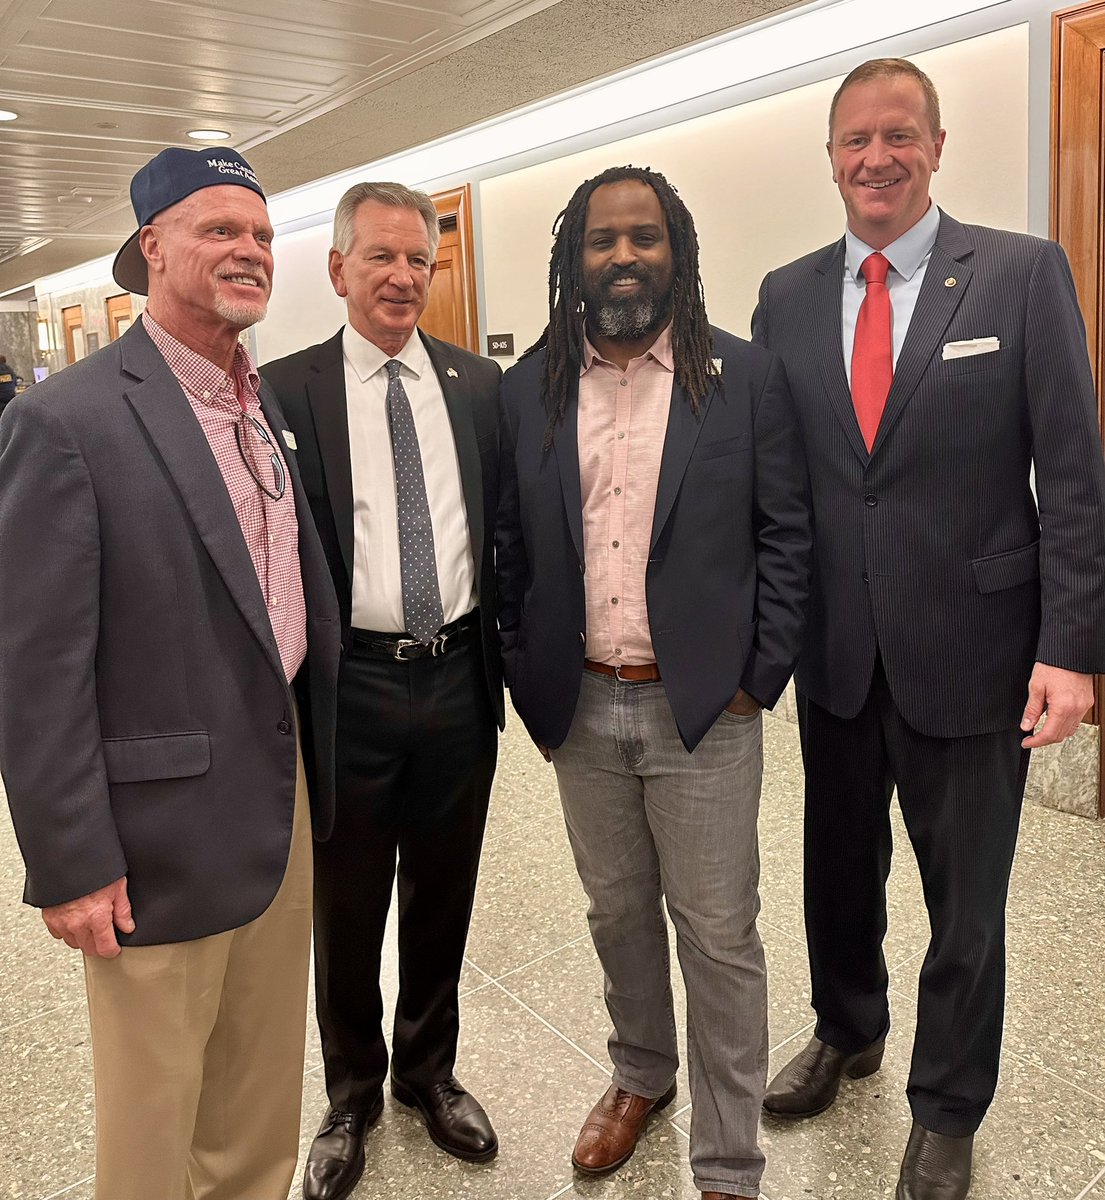 Ran into Jim McMahon and Ricky Williams on the way to a hearing today along with @TTuberville. I told Jim McMahon I still know the lyrics to the iconic “Super Bowl Shuffle”